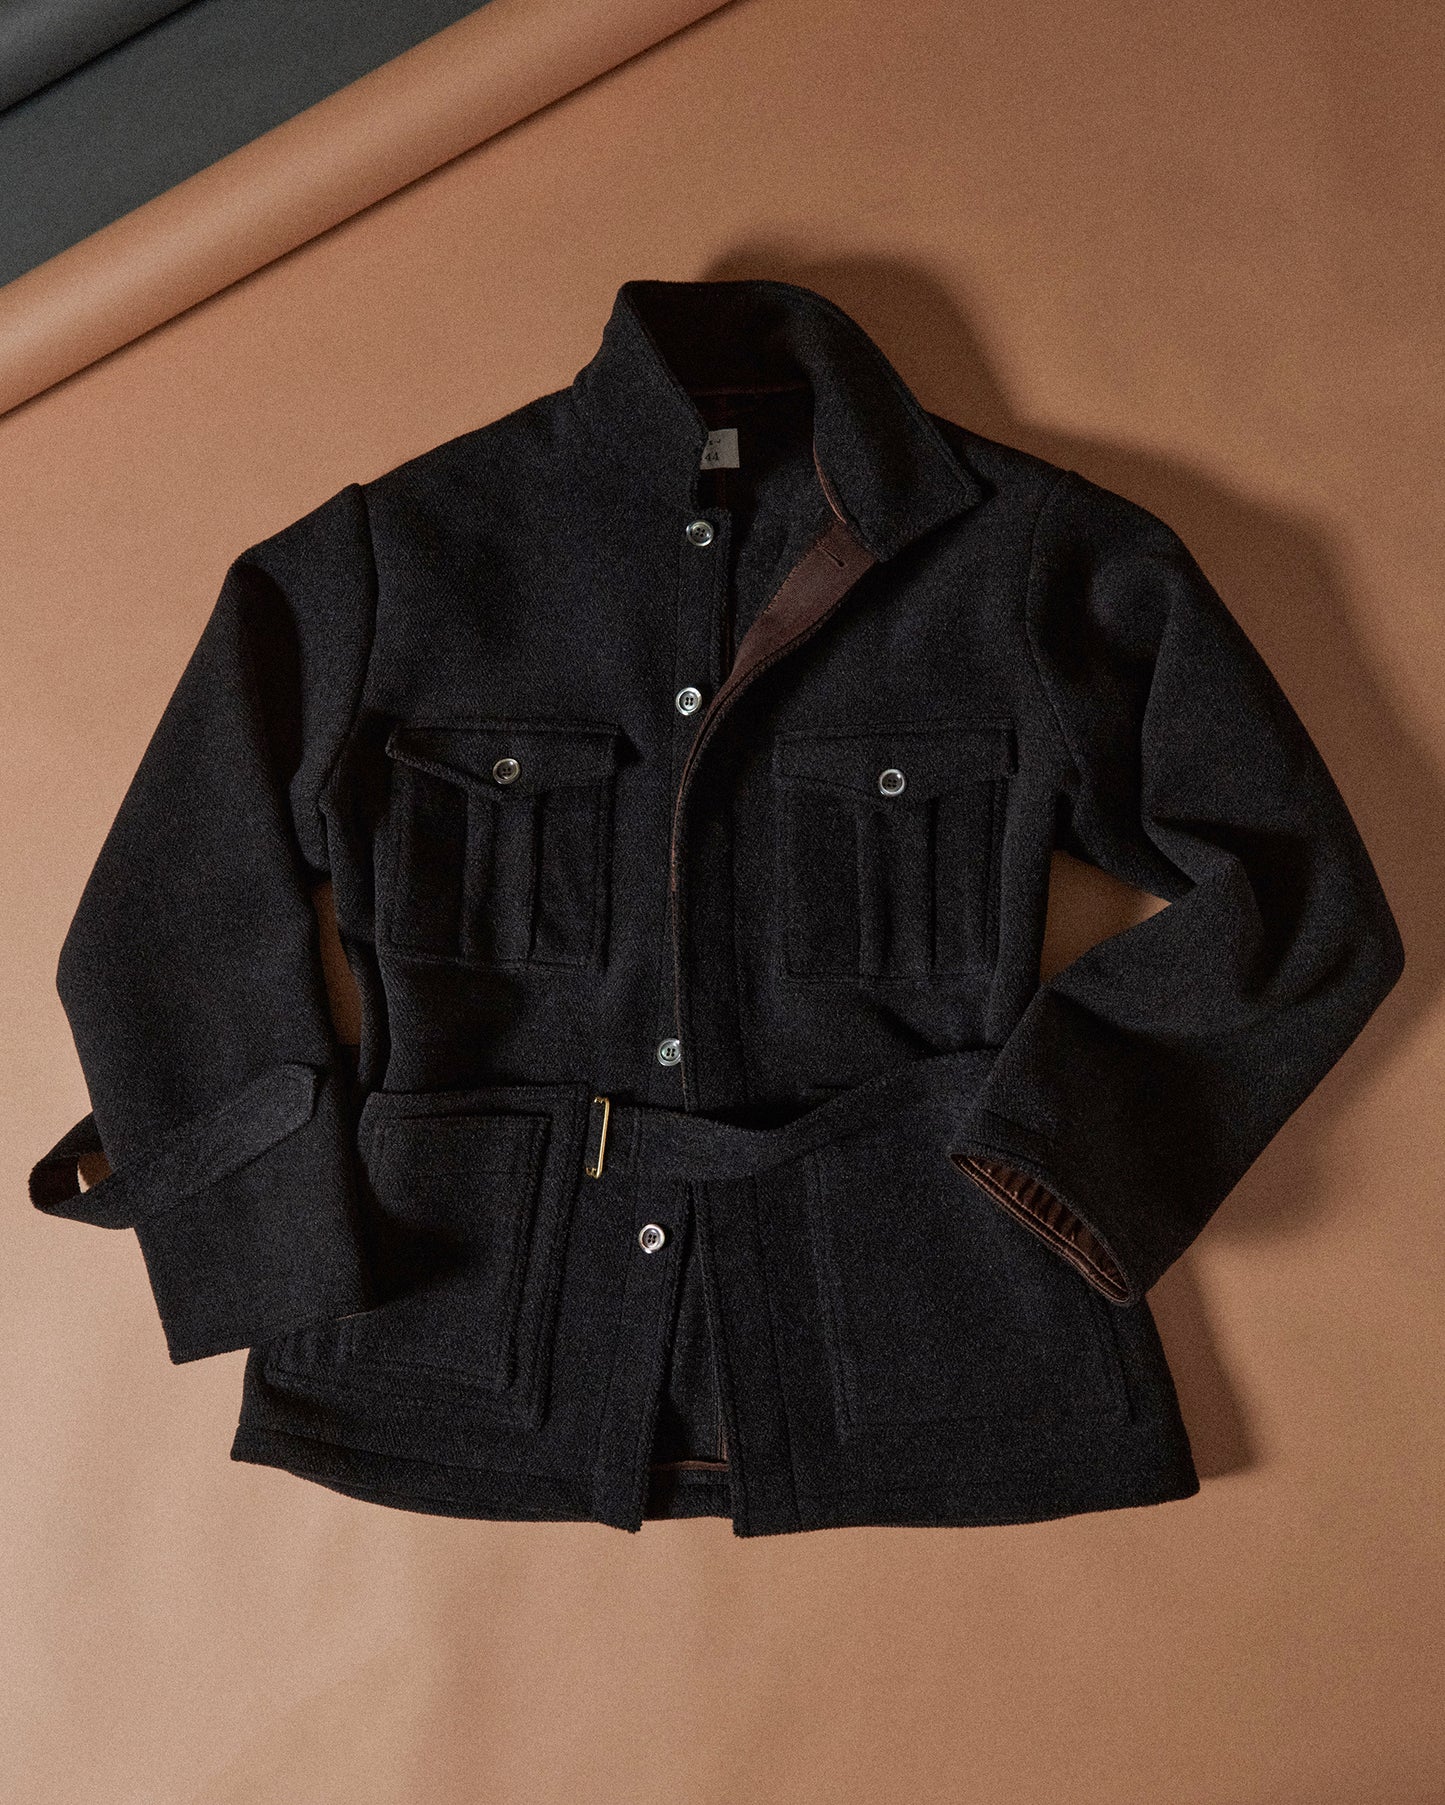 JK-00003-WD6 - Overall, It's A Jacket